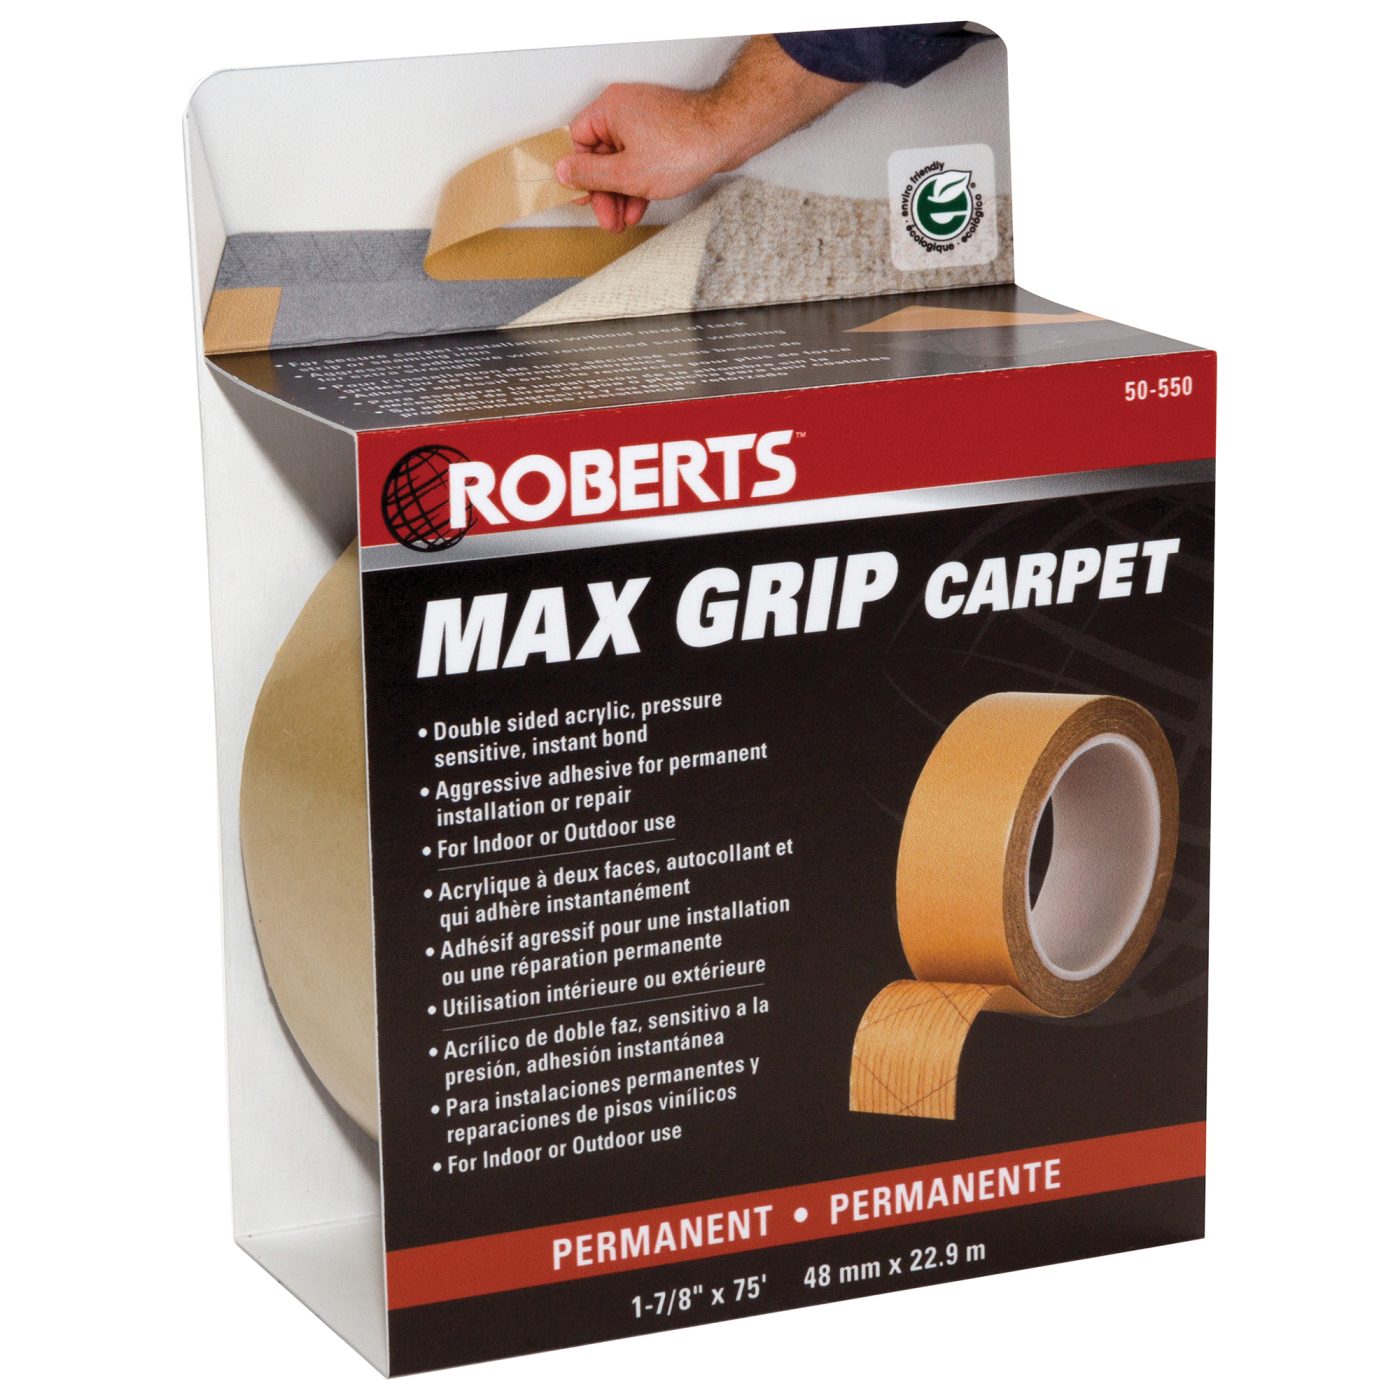 https://www.robertsconsolidated.com/wp-content/uploads/2022/11/ROBERTS_MAX-GRIP-Carpet-Tape_50-550_Package-Front-scaled.jpg